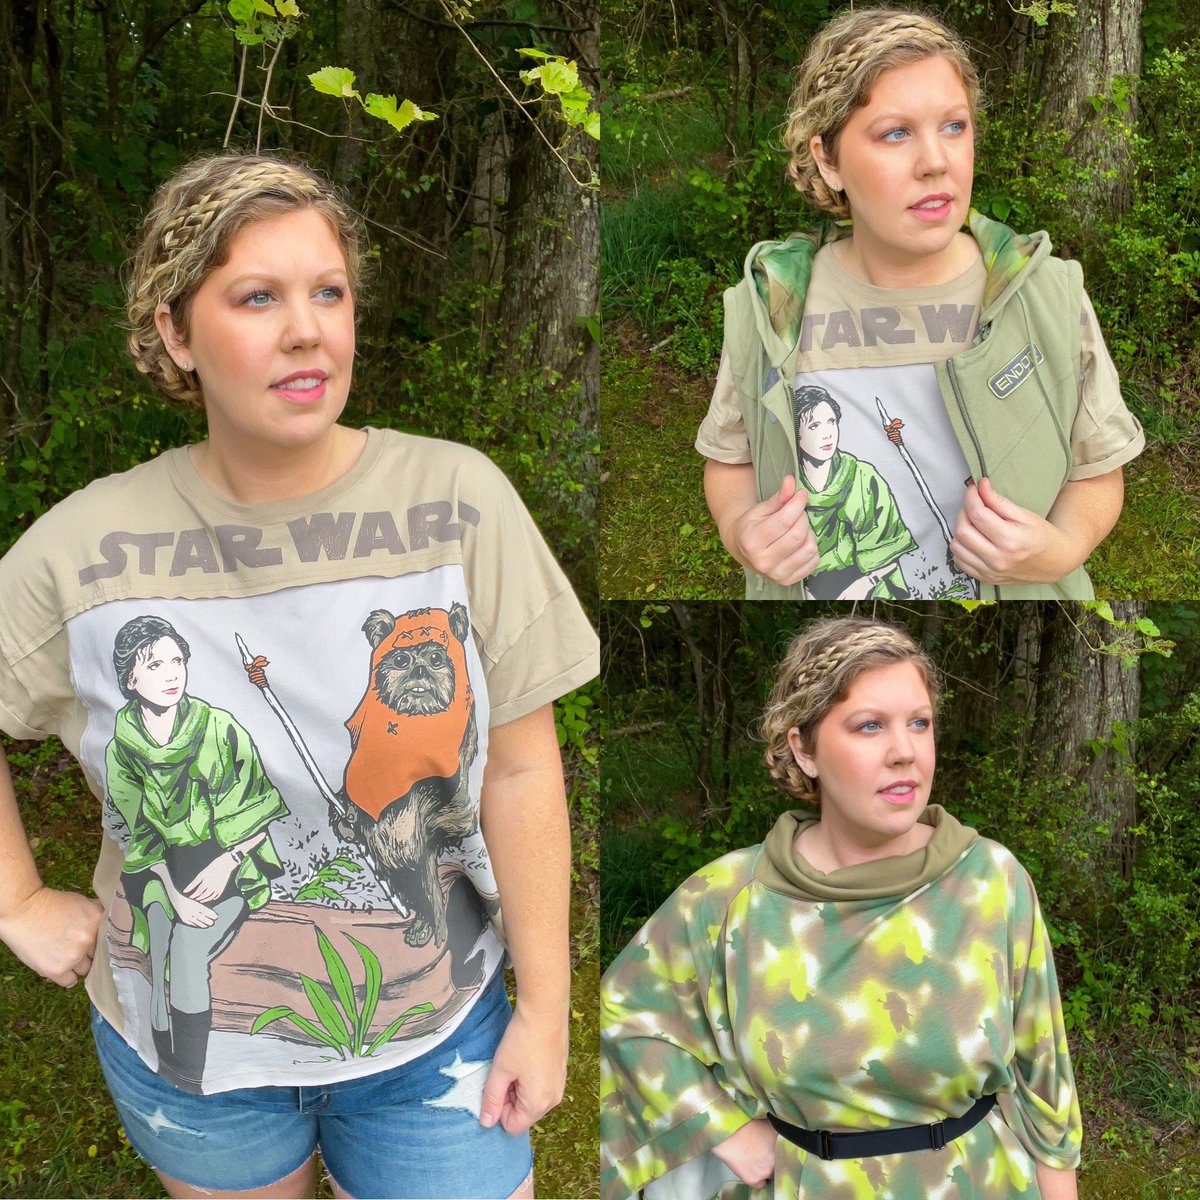 Casual to cosplay…Endor Leia edition
Tee @shopDisney 
Vest & Poncho @HerUniverse 
@starwars 

#PrincessLeiaOrgana #PrincessLeia #LeiaOrgana #PrincessLeiaCosplay #Endor #ShopDisney #ROTJ #ReturnoftheJedi #StarWarsstyle #HerUniverse #HUcommunity #ReturnoftheJedi40thAnniversary